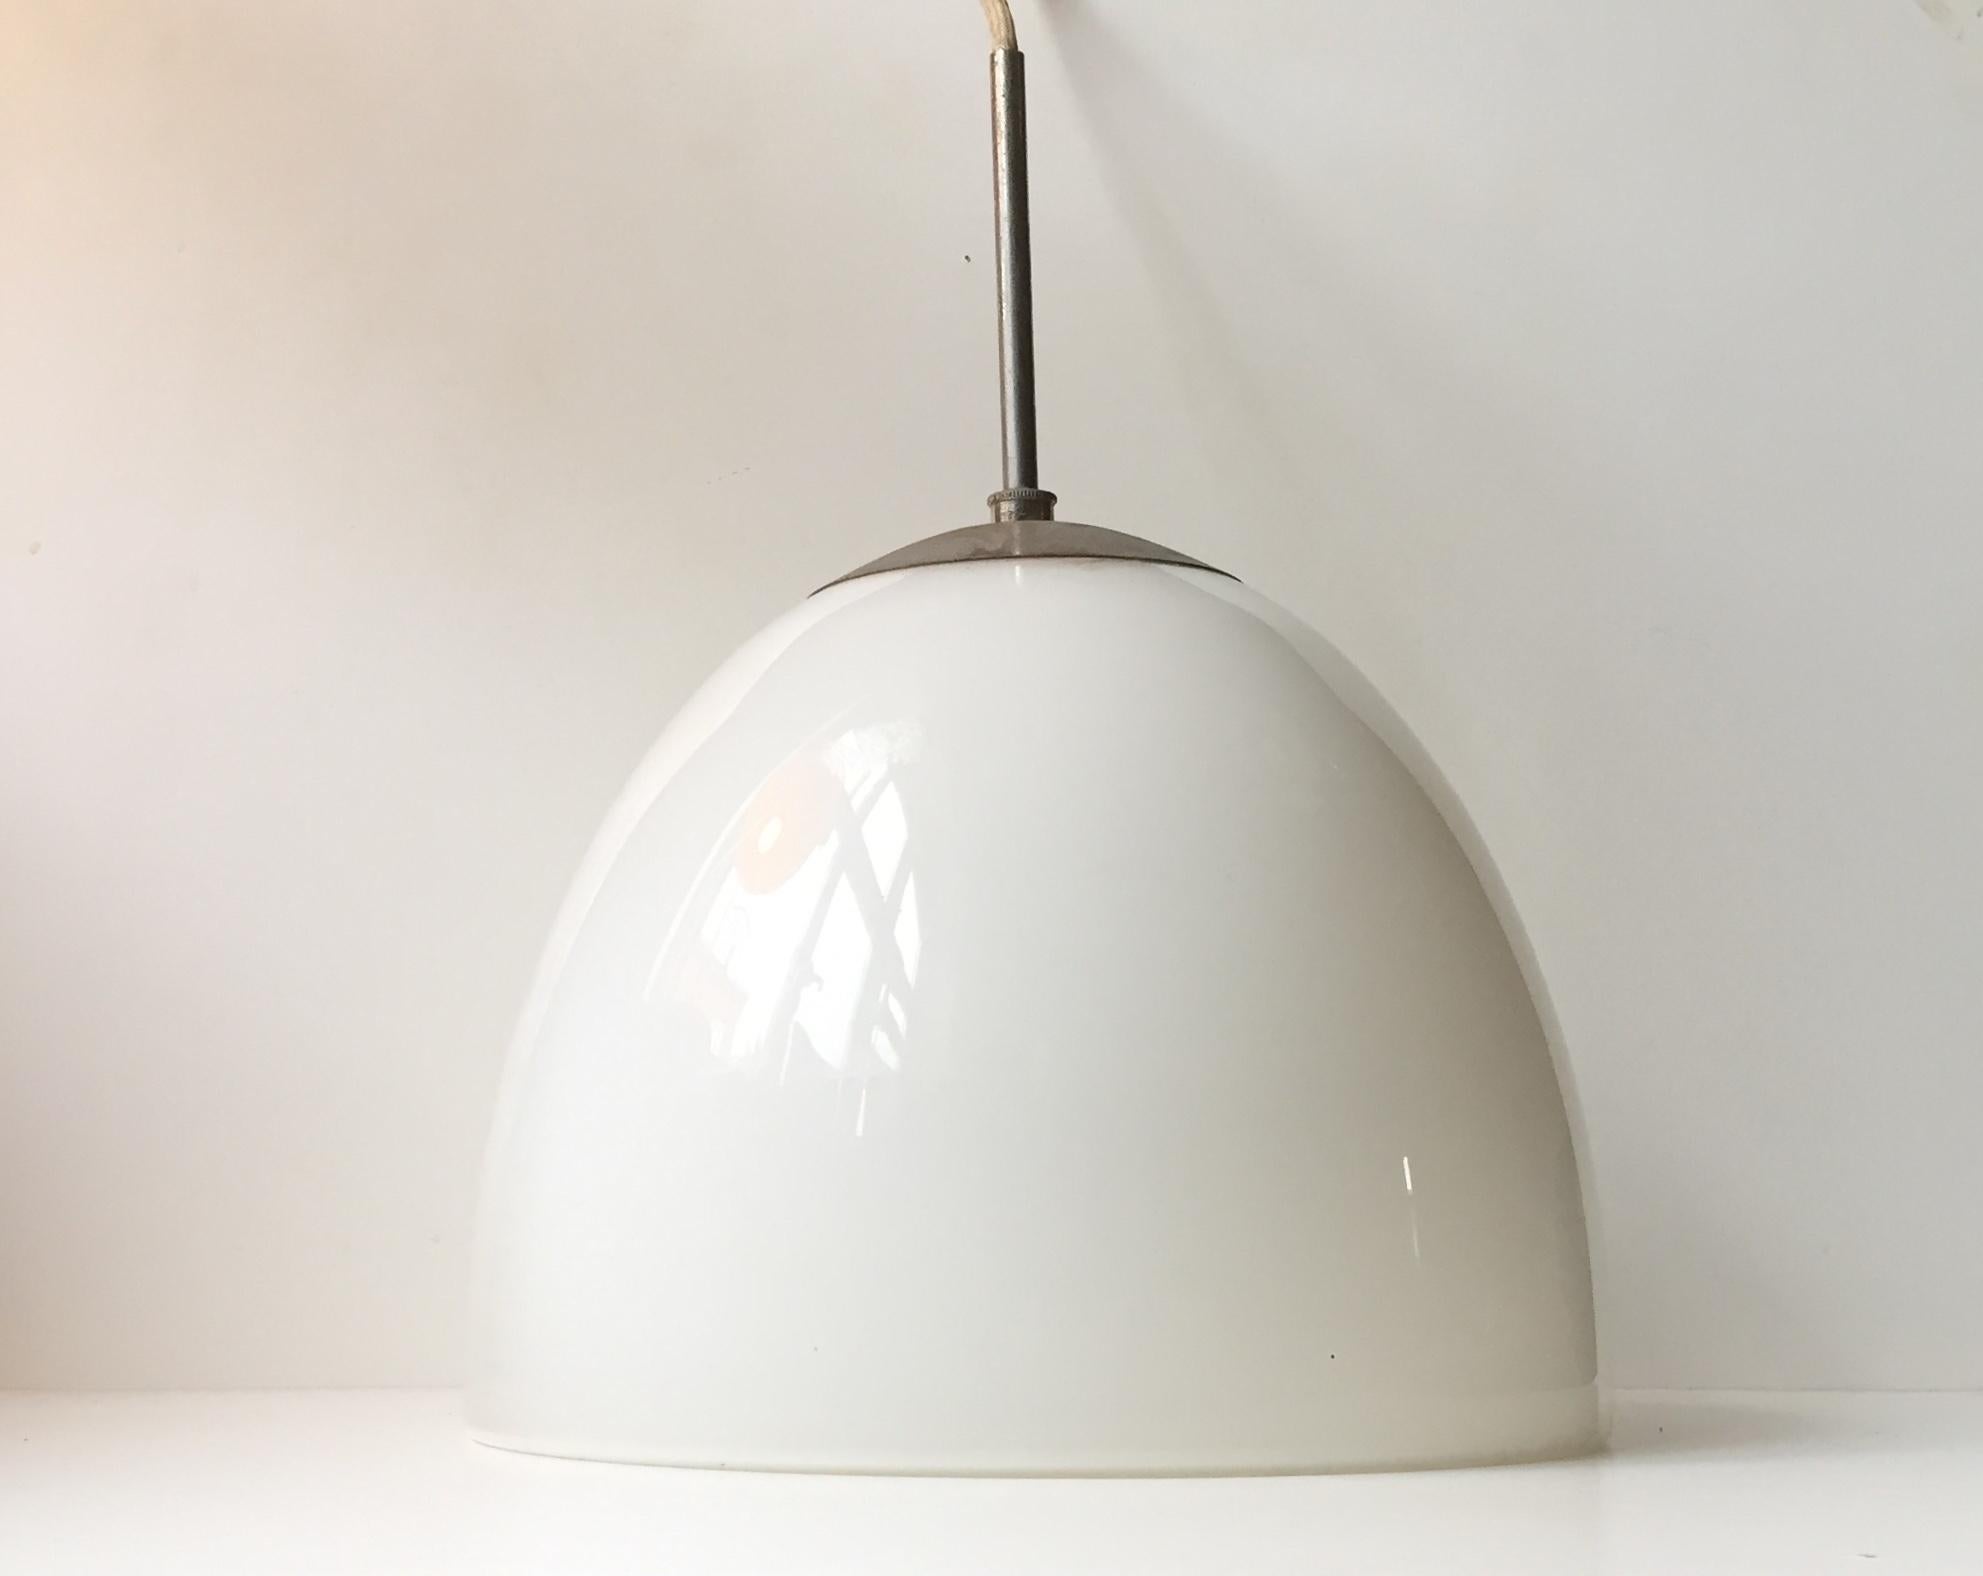 This white opal glass and chromed Steel Bell shaped pendant light was manufactured by Louis Poulsen in Denmark during the 1950s. The style is Funkis or Bauhaus and design is reminiscent of works from Vilhelm Lauritzen.